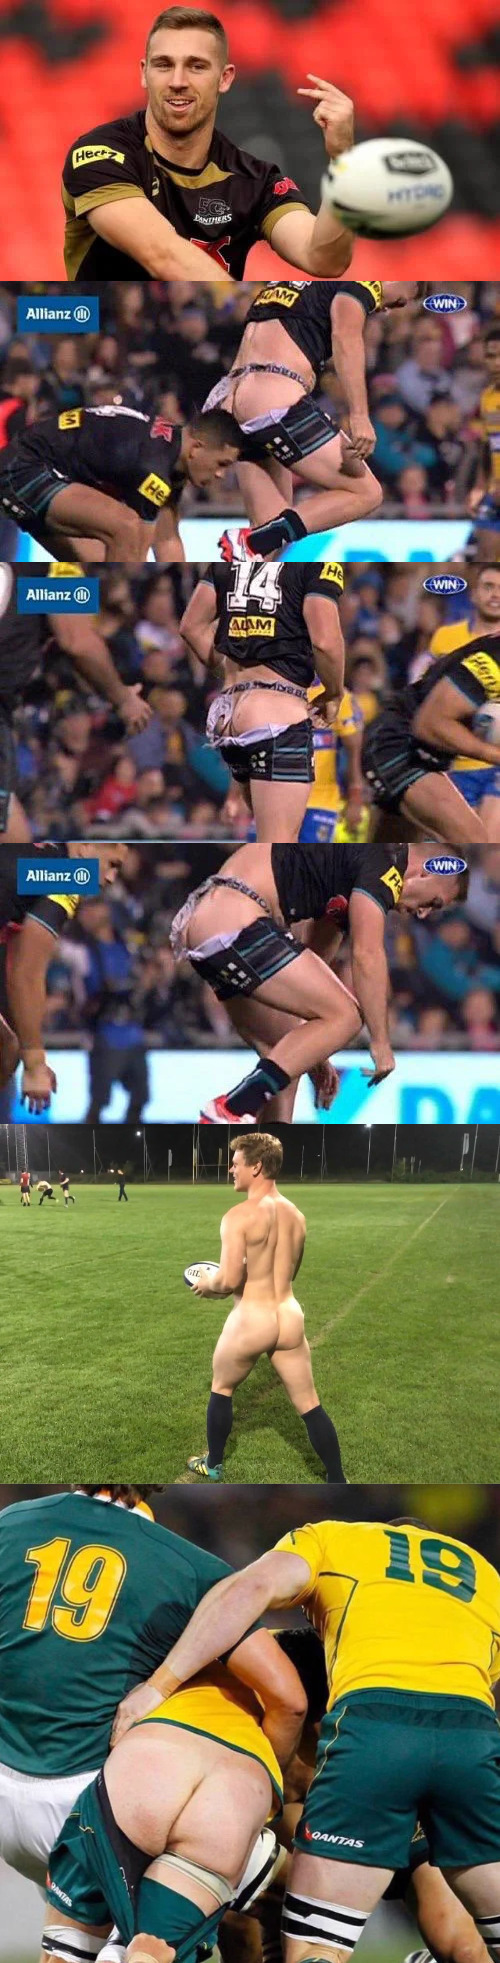 rugby players pantsed on the pitch accidentally reveals their butts